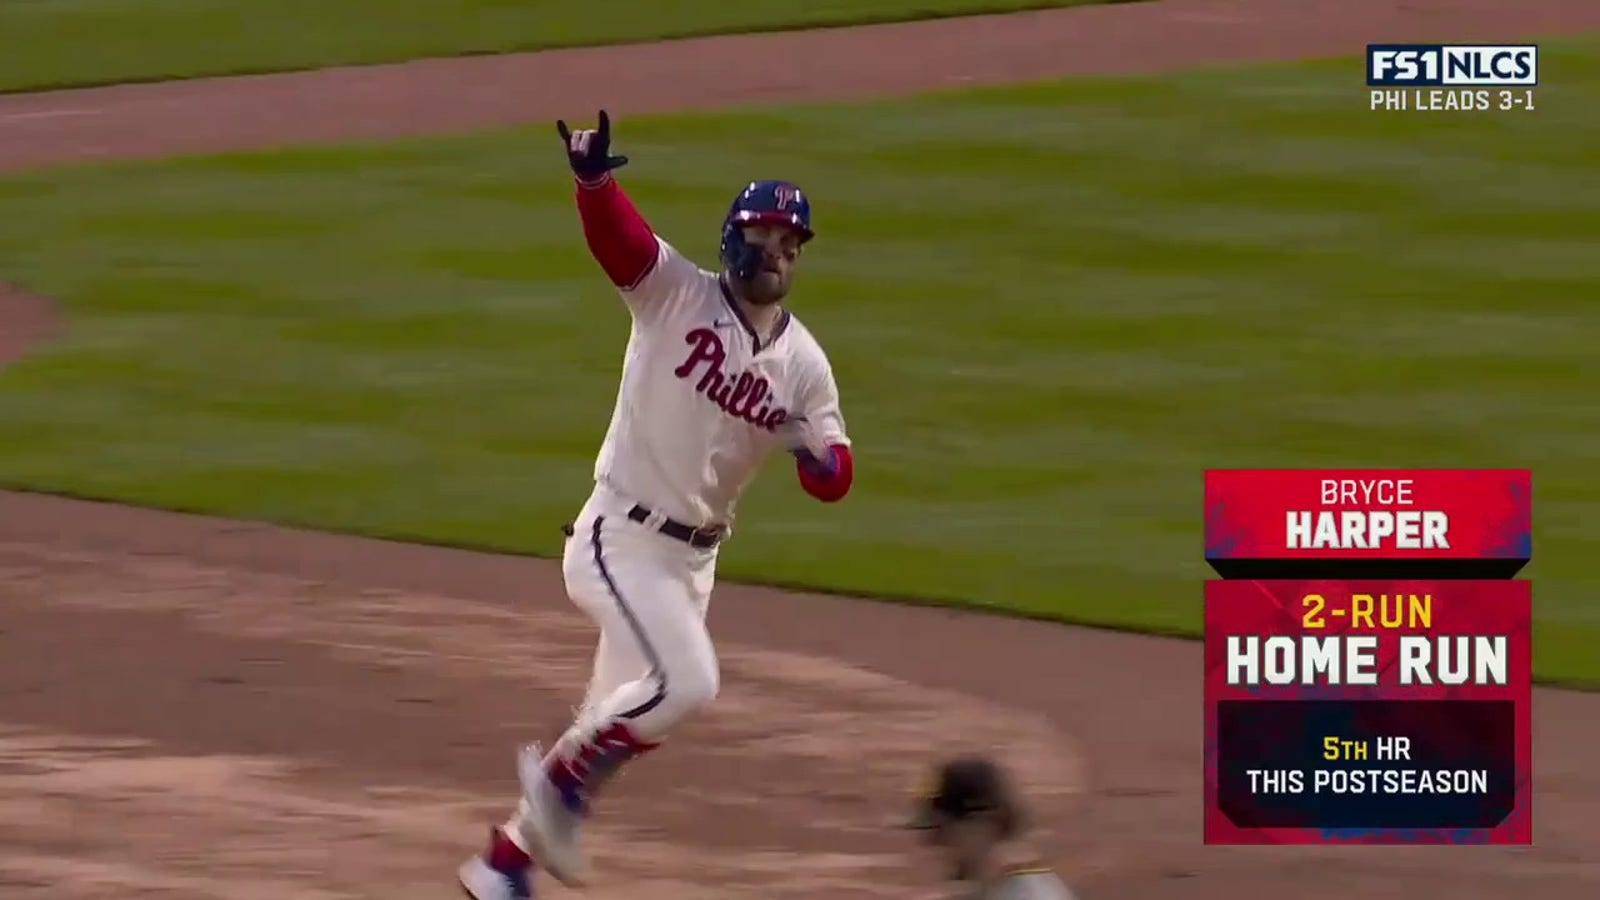 Bryce Harper launches a two-run home run to give Phillies the lead